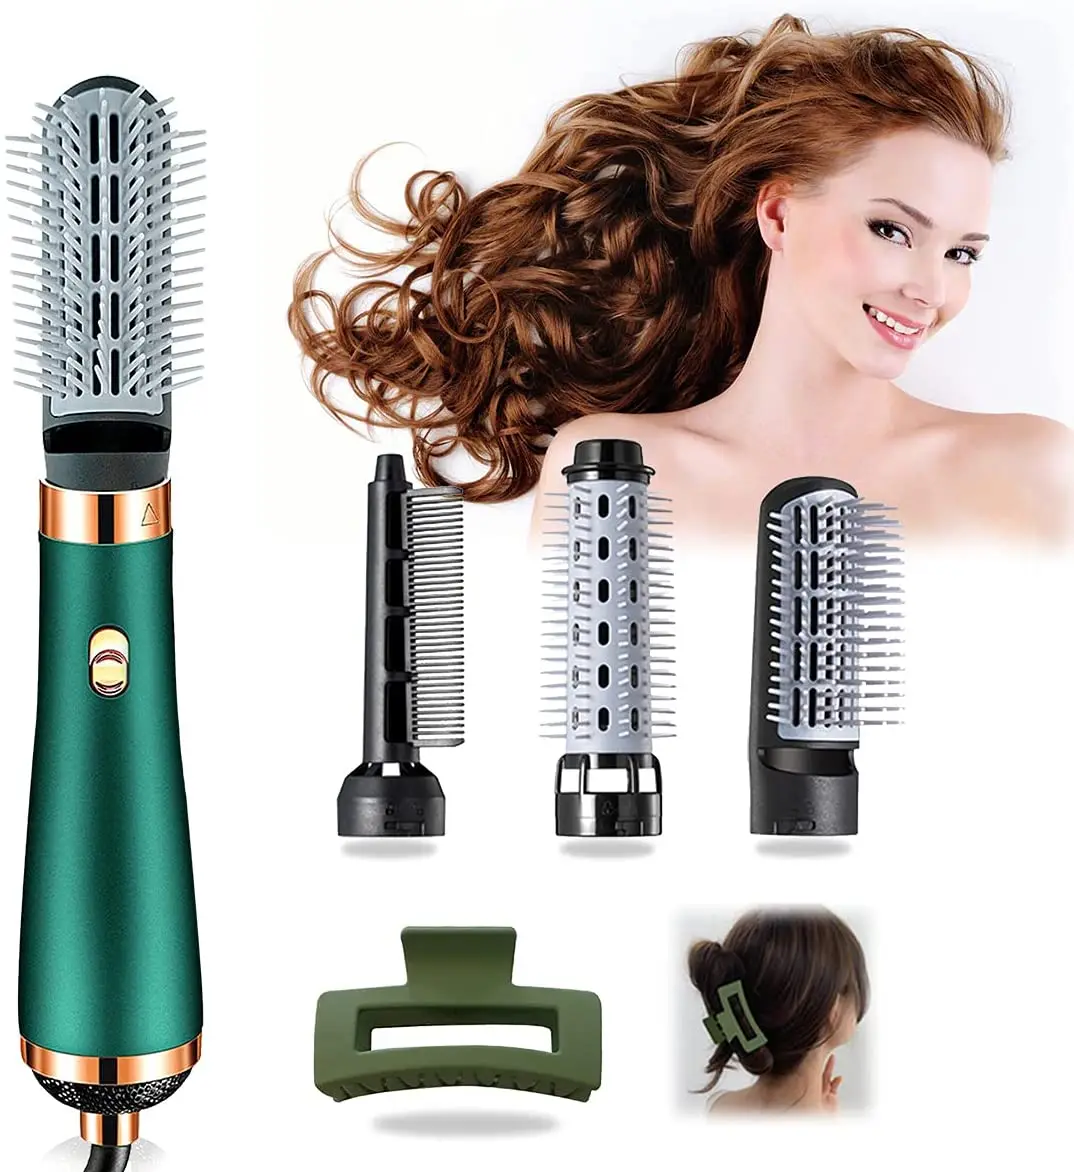 4 In 1 Hot Air Hair Brush Comb,One Step Hair Dryer And Volumizer  Styler,Salon Negative Ionic Blow Dryer Straightener & Curler - Buy One Step Hair  Dryer,Hair Dryer Professional Salon,Hair Dryer Brush